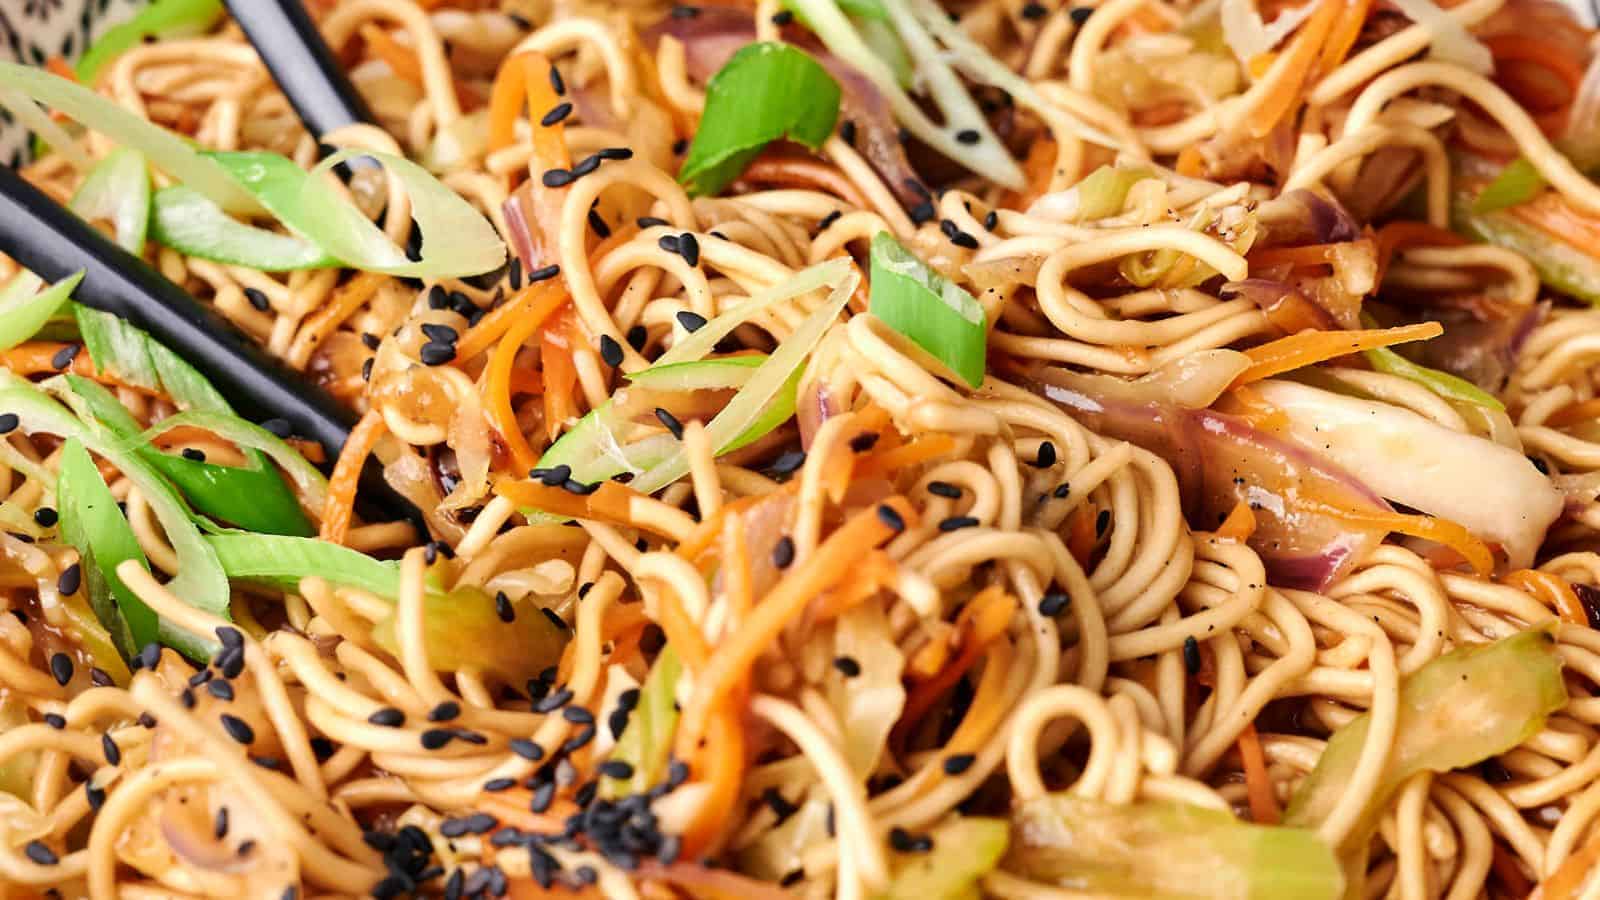 A close-up view of a plate of chow mein stir-fried noodles with vegetables and black sesame seeds, with chopsticks visibly picking up a portion.